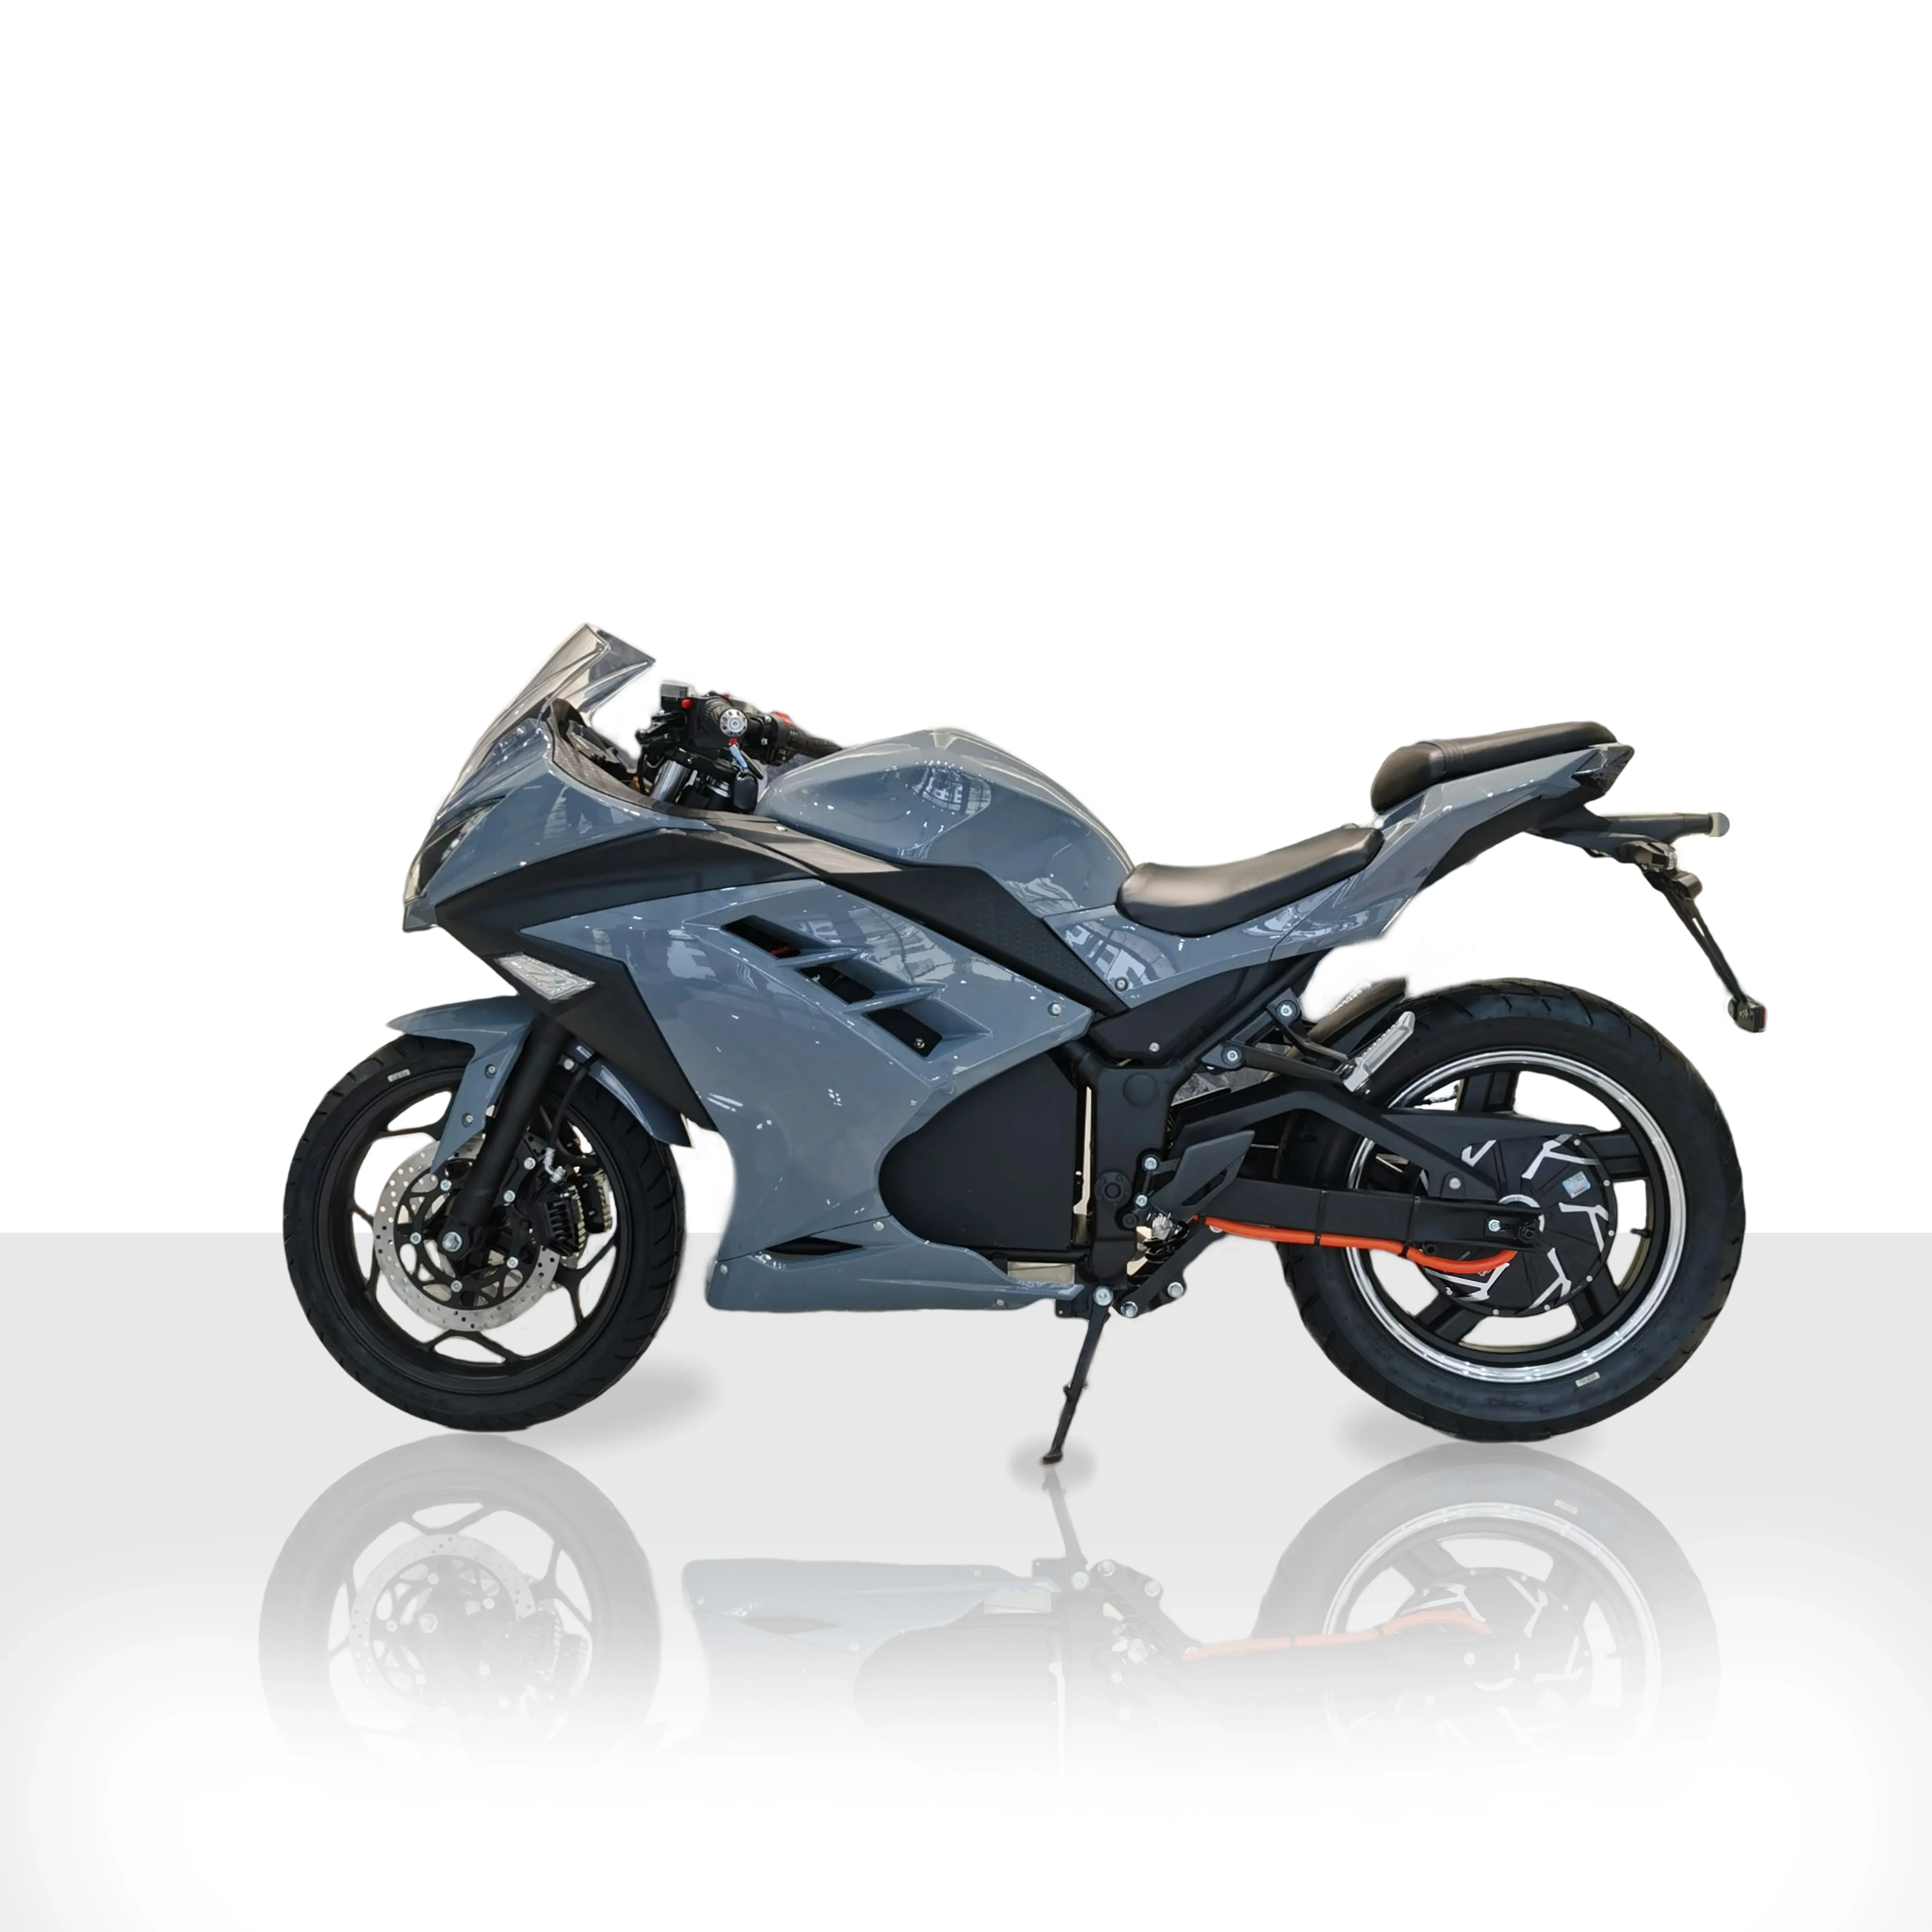 

Street Legal EEC COC Electric Motorcycle For Adults For Sale Motorcycle 3000w Wheel Motor